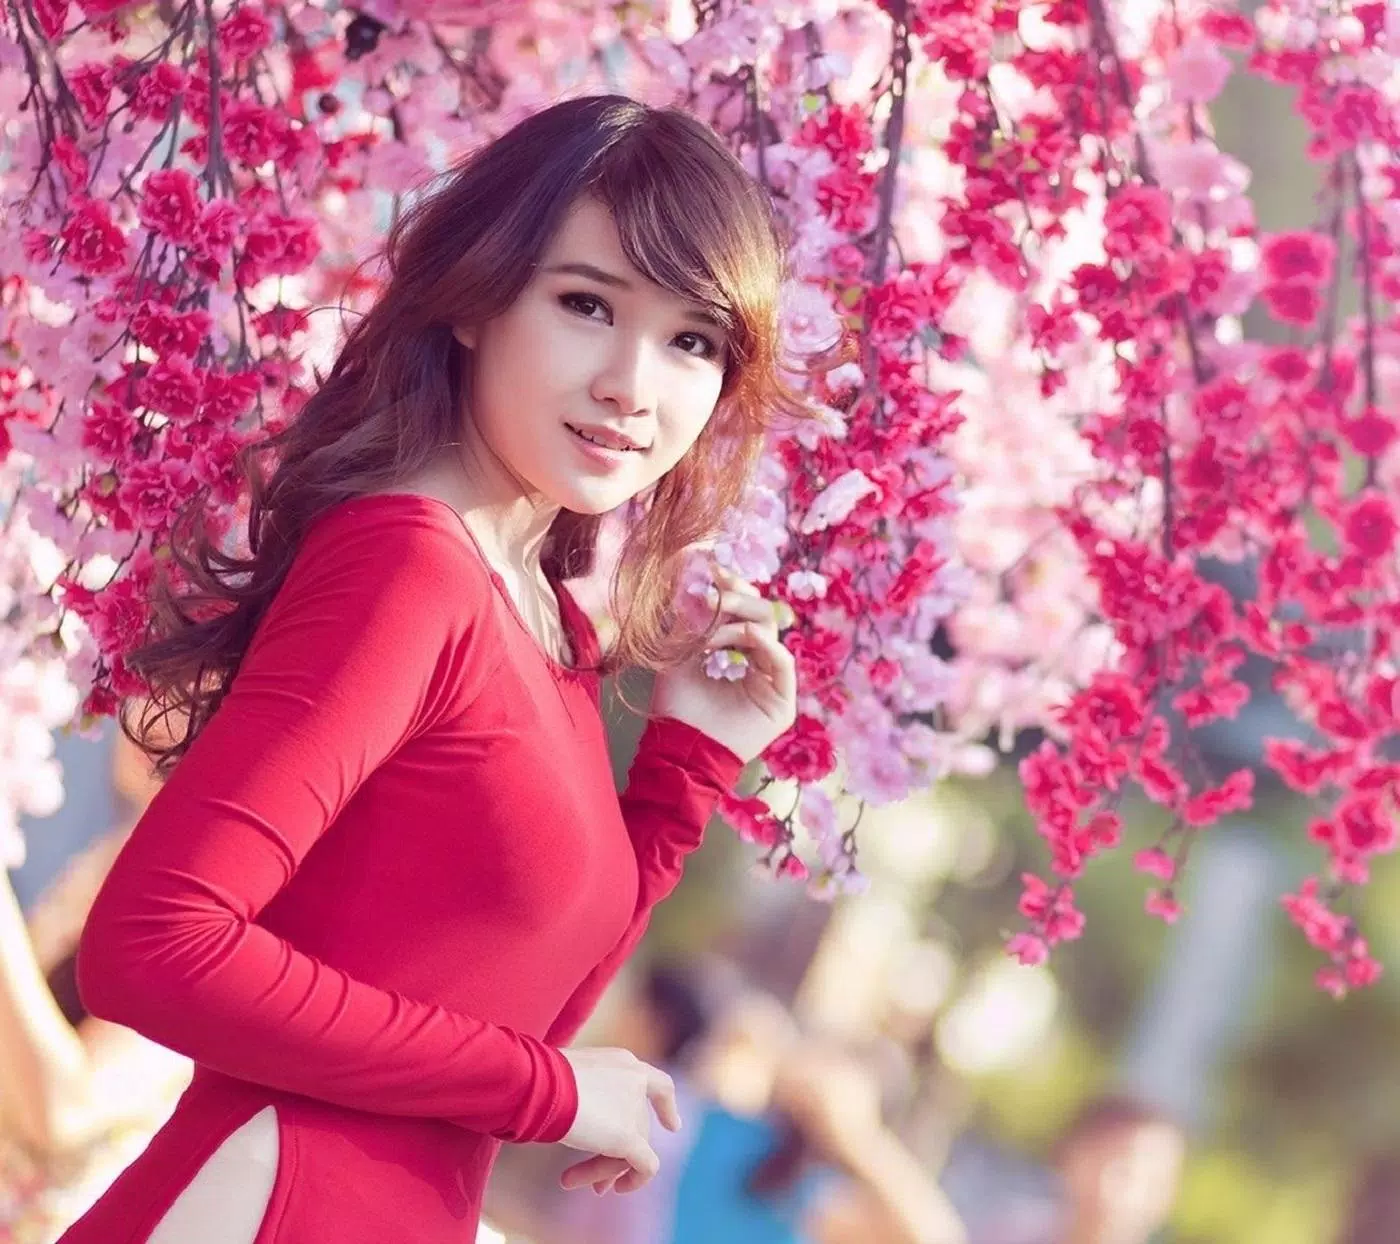 Hot Sexy Japanese Girls Wallpapers HD for Android - APK Download